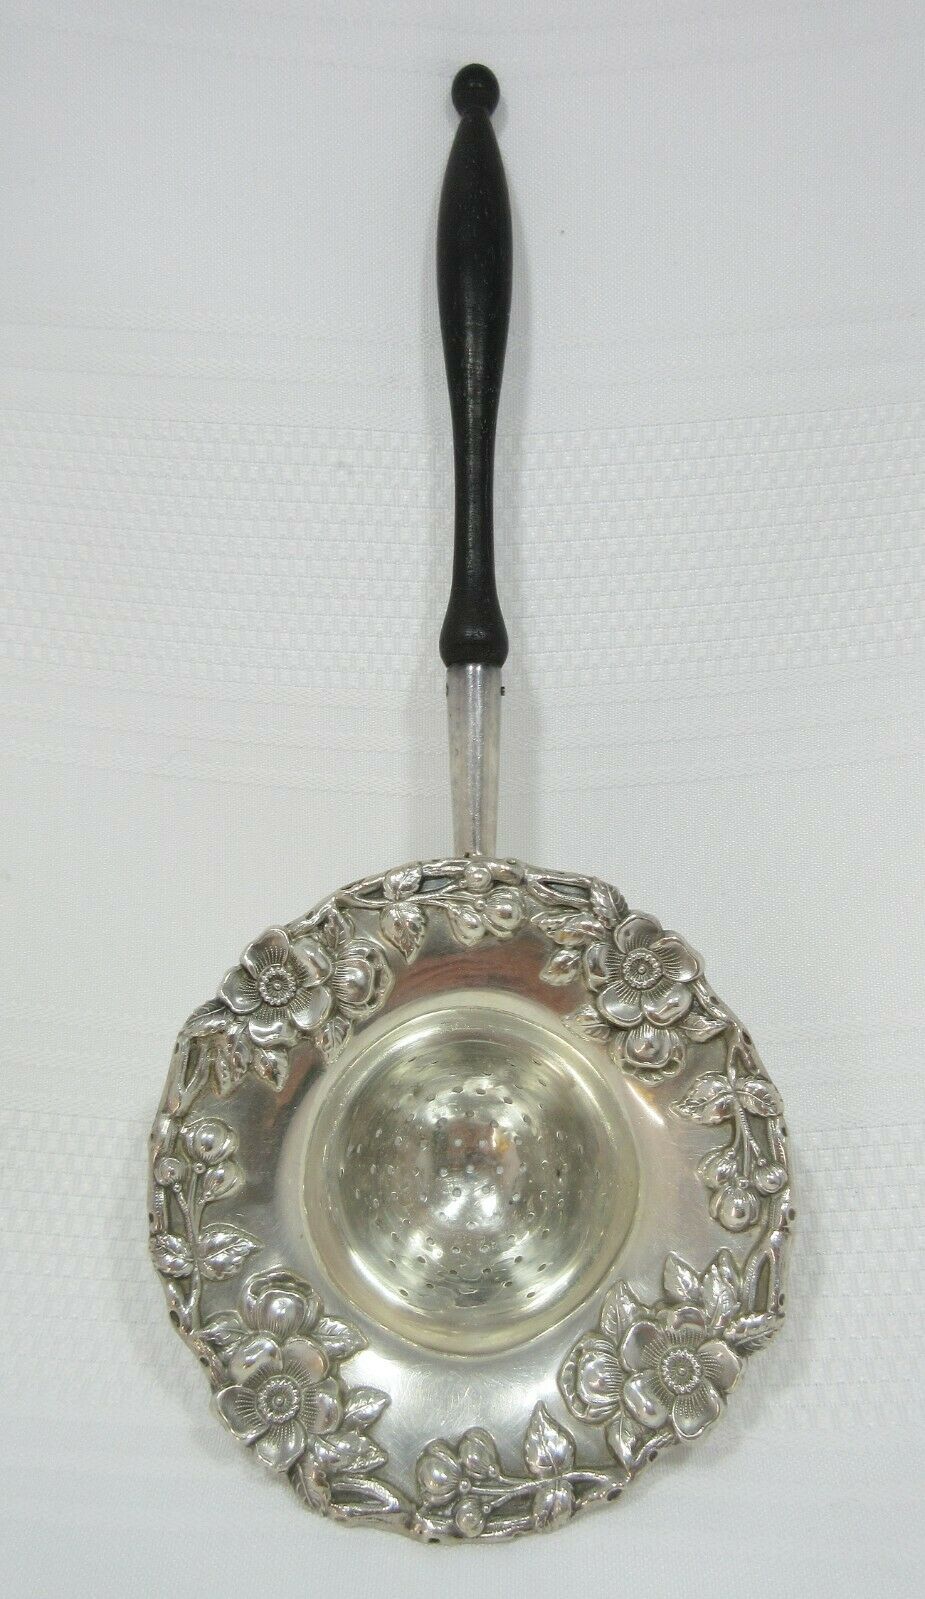 Antique Tea Strainer Sterling Silver Repousse Flowers Ebony Handle Whiting Mfg.